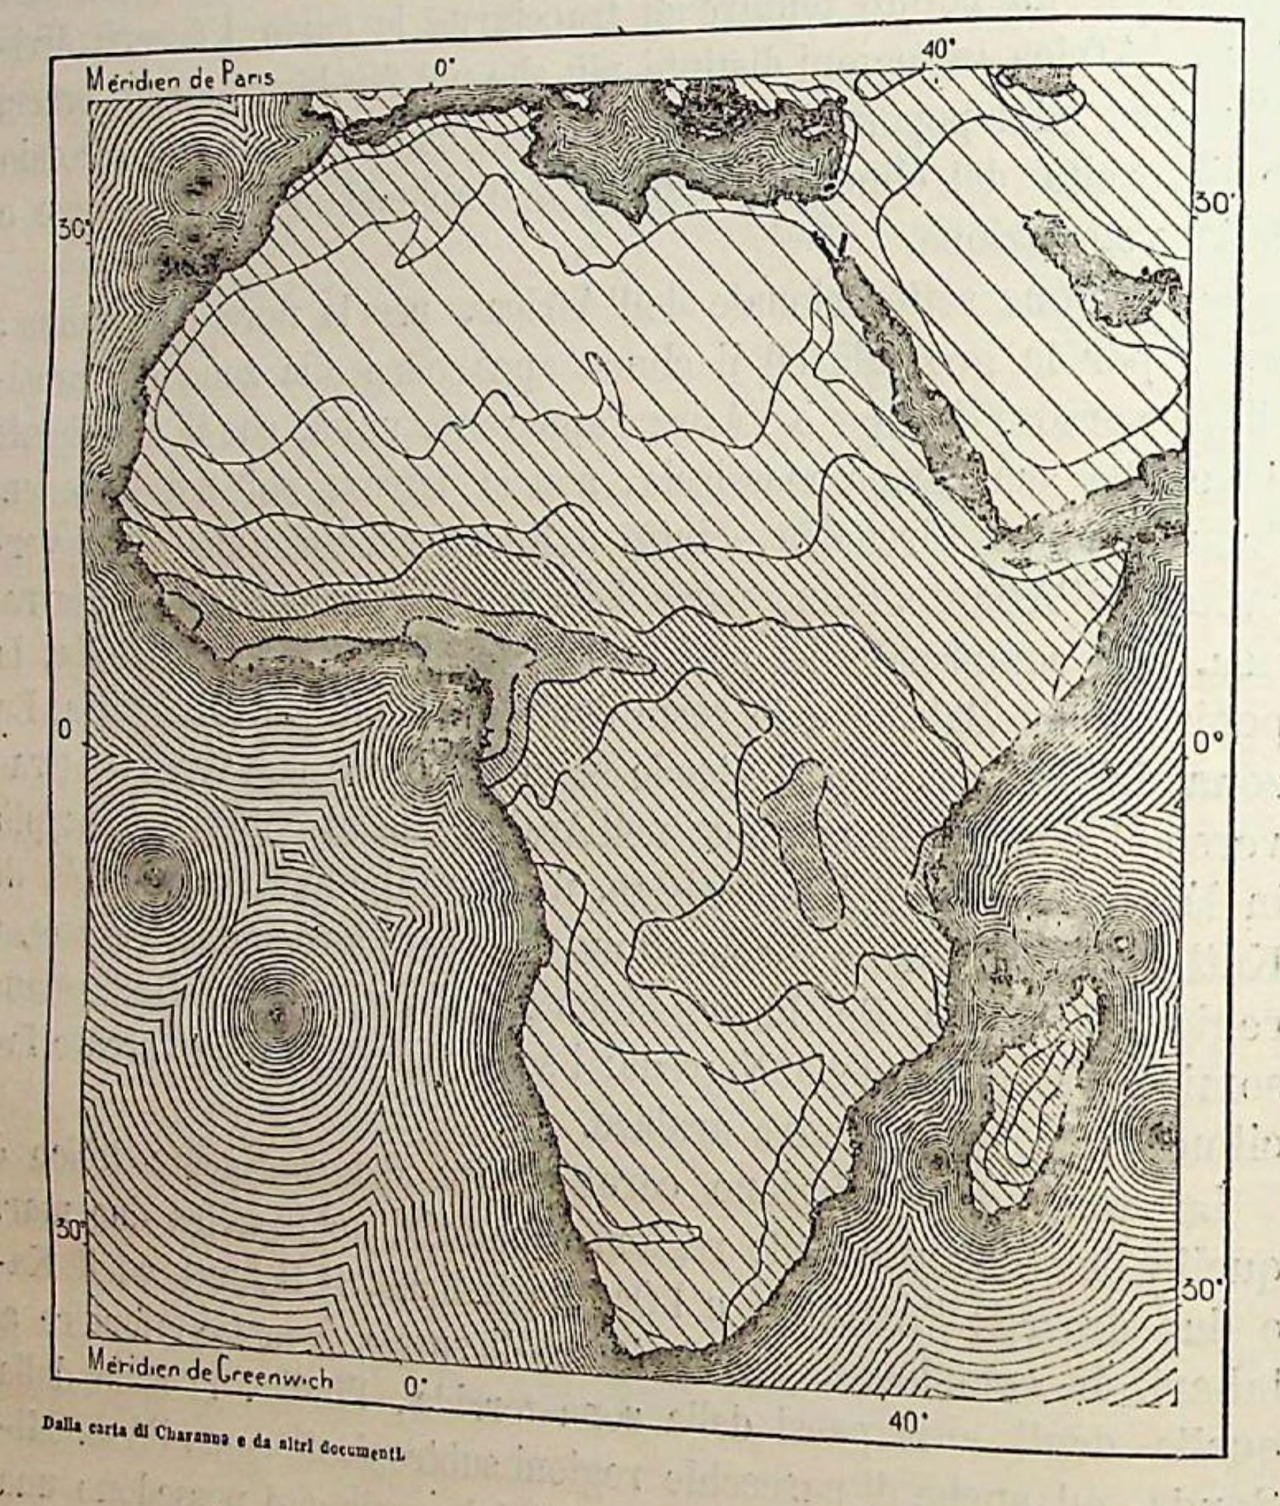 Rainfall in Africa. Nuova Geografia Vol Dieci. 1887.Internet Archive #map#diagram#chart#africa#climate#rainfall#graph#parallel lines#nemfrog#1887#19th century